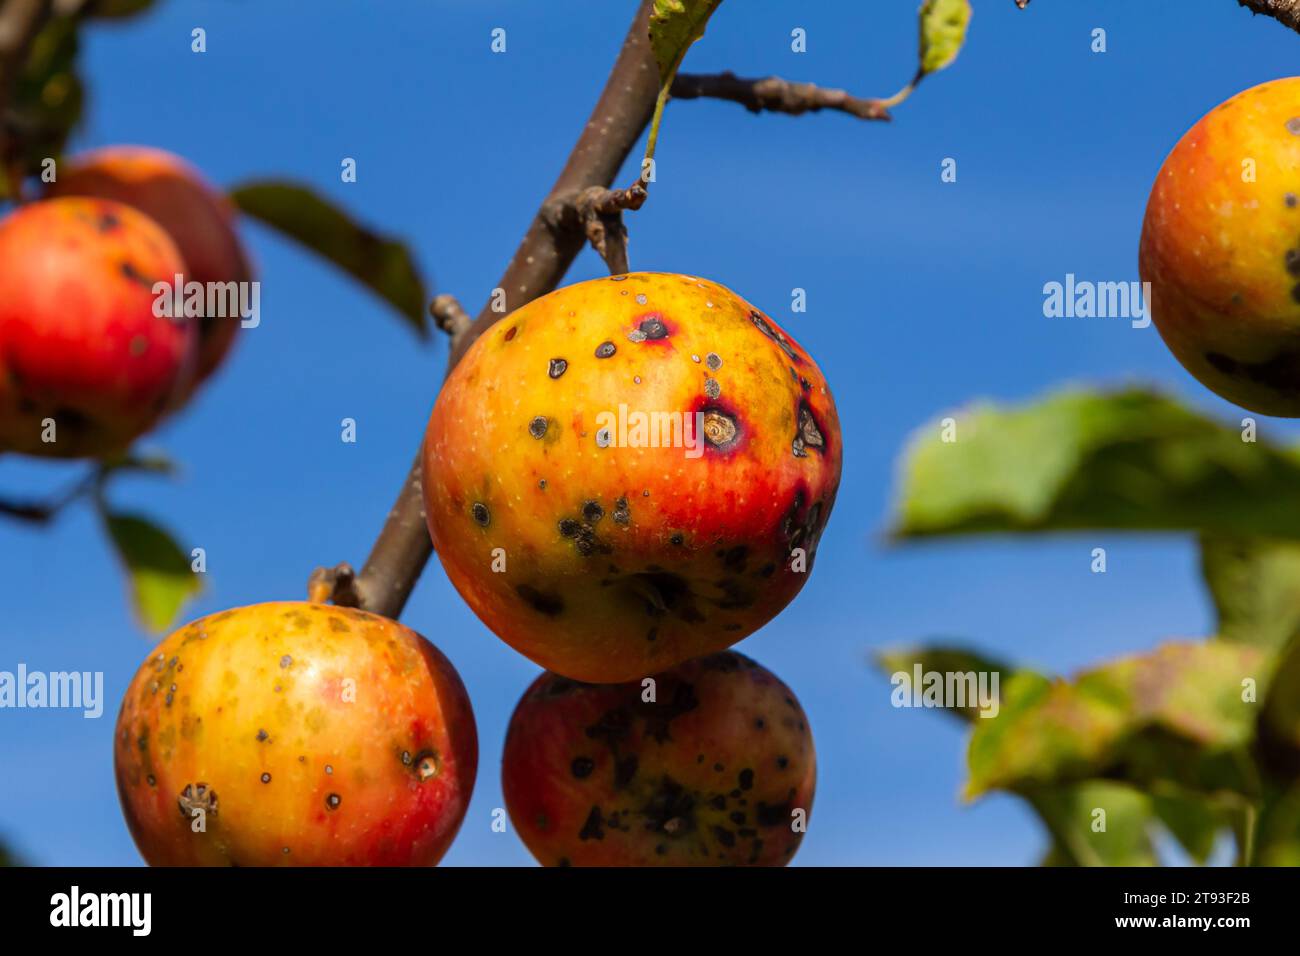 A Stack Of apple scab Diseases and Symptoms with Apple trees. Stock Photo